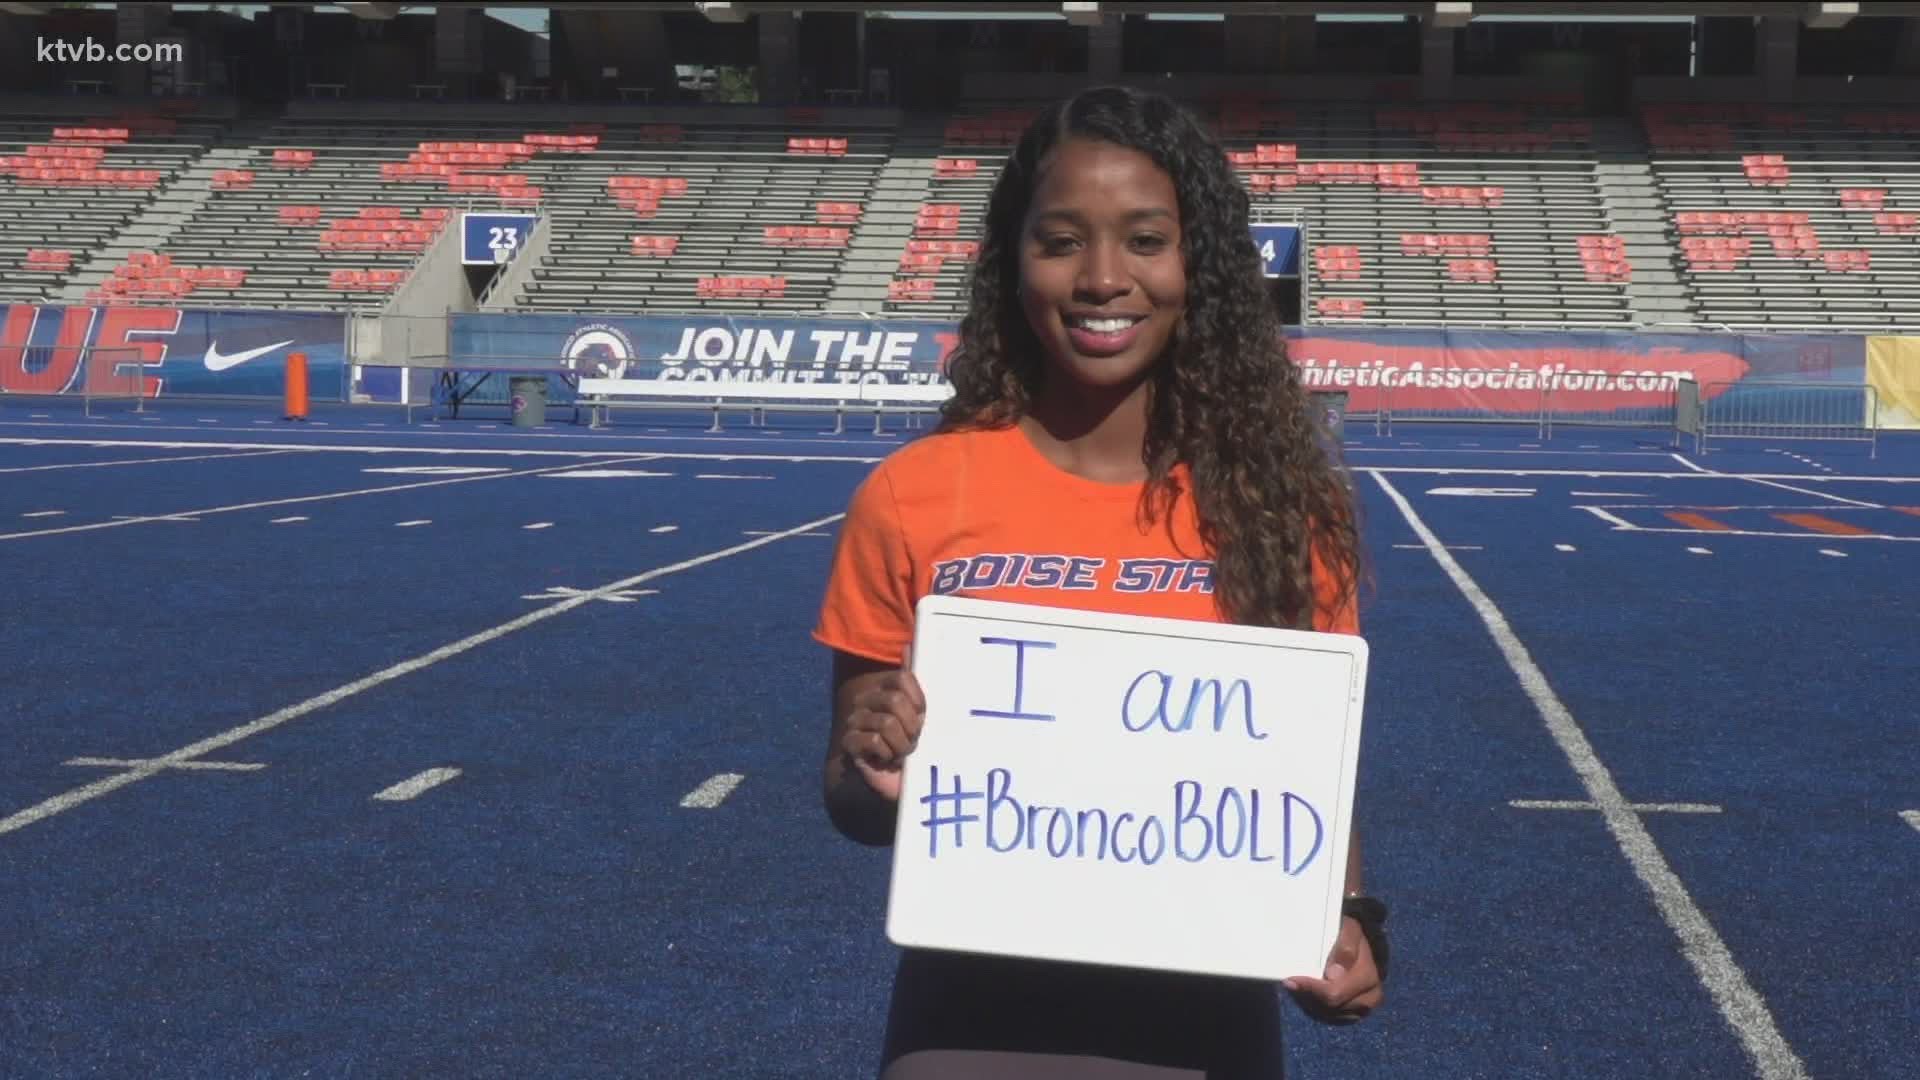 Boise State recently launched BroncoBOLD, an initiative that champions the importance of mental health and wellness in all areas of life through sports.